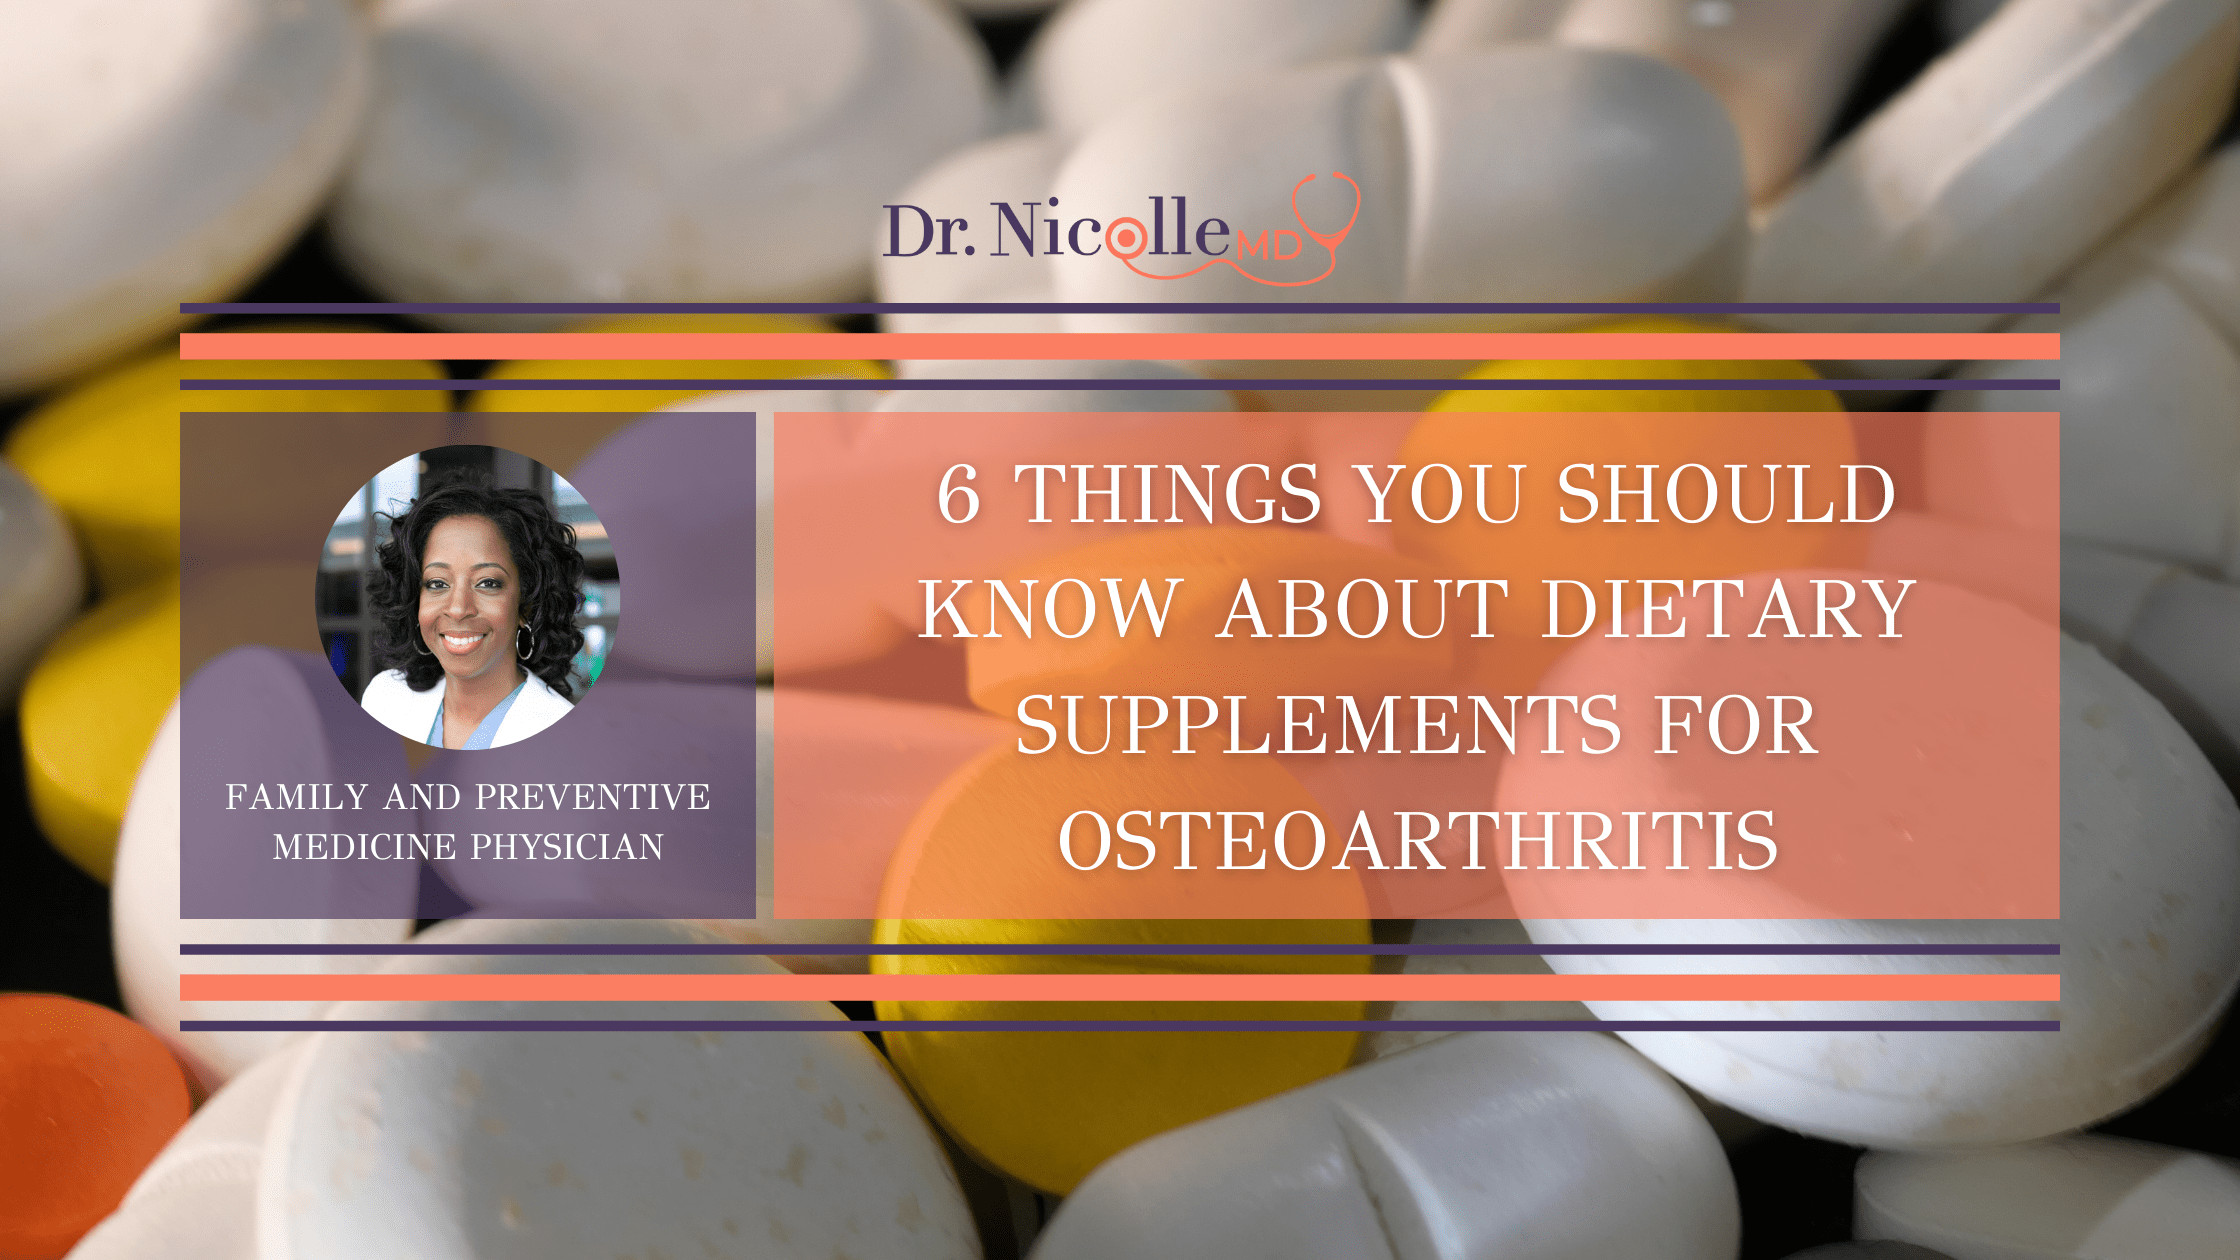 116 Things You Should Know About Dietary Supplements for Osteoarthritis